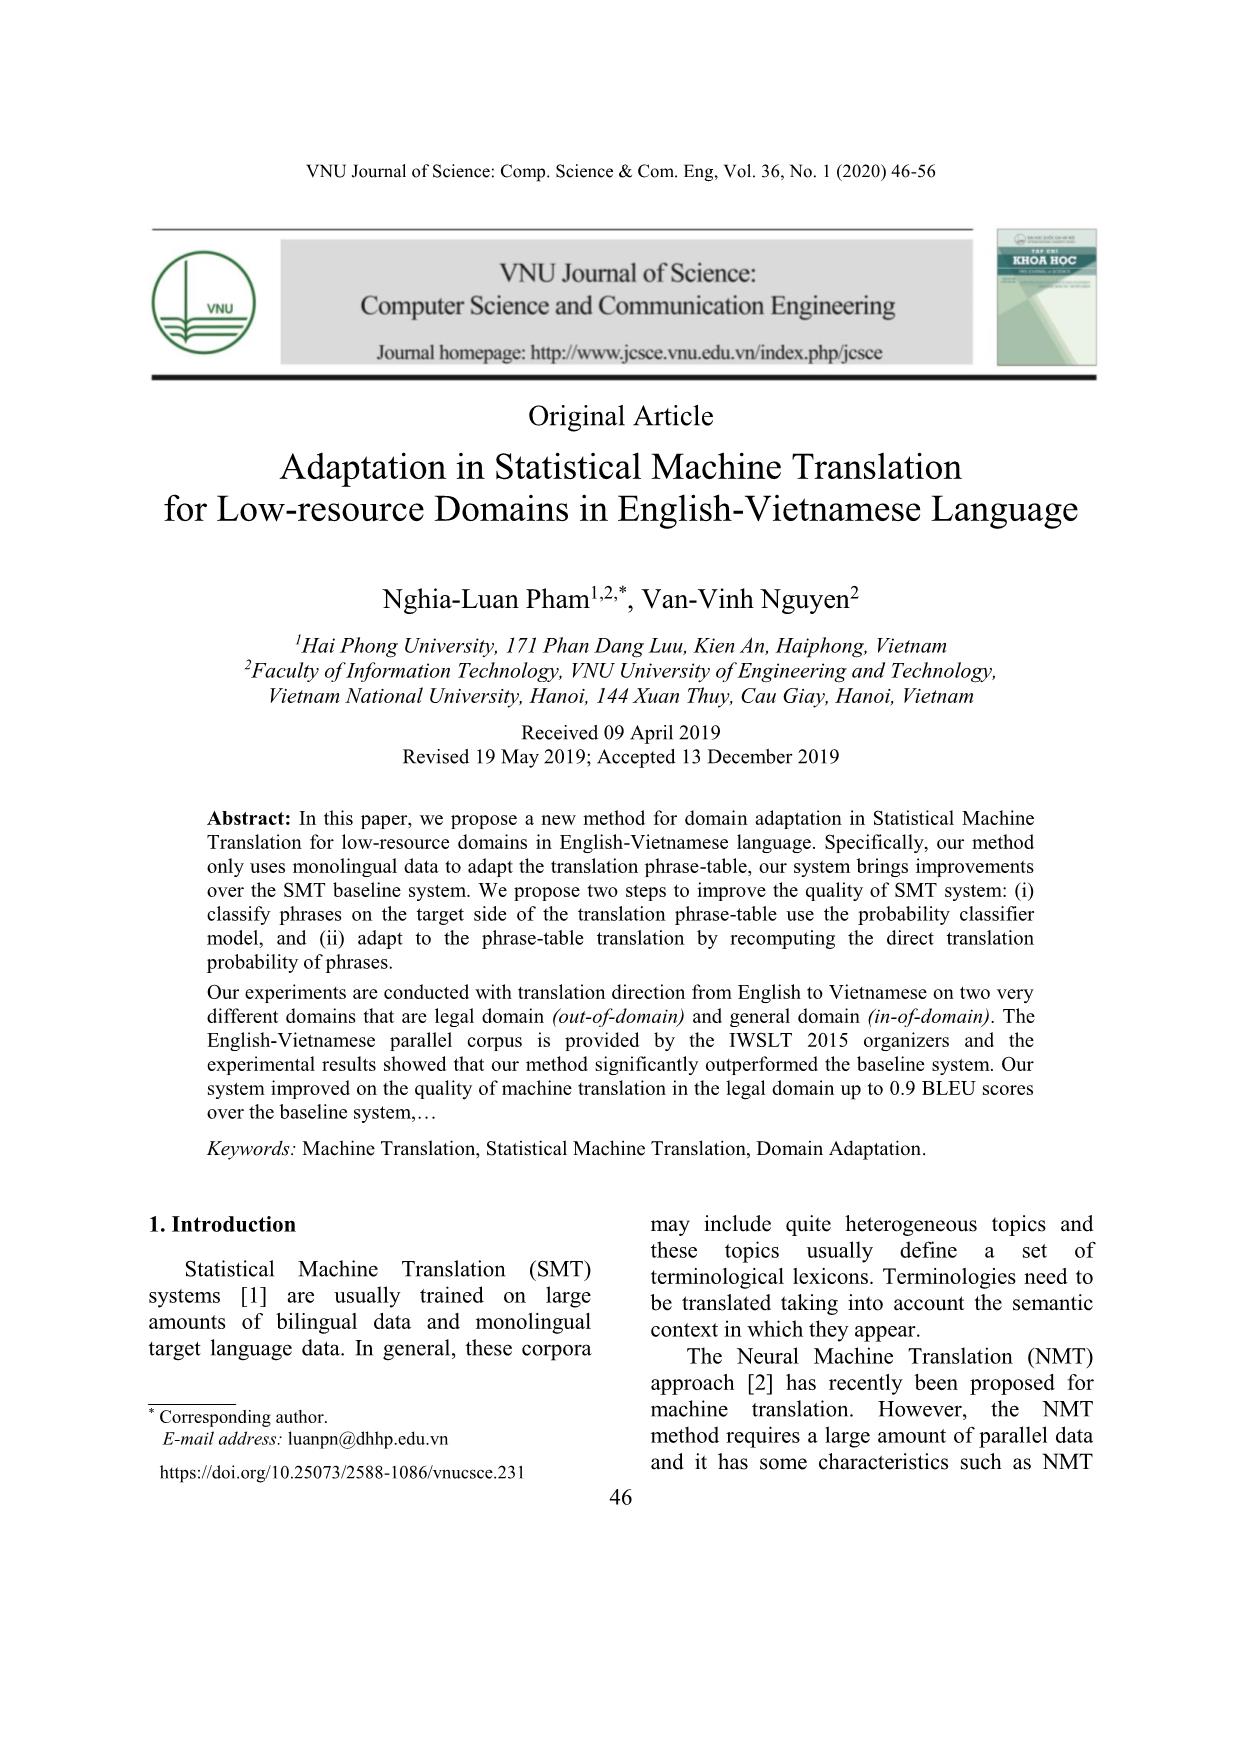 Adaptation in Statistical Machine Translation for Low-Resource Domains in English-Vietnamese Language trang 1